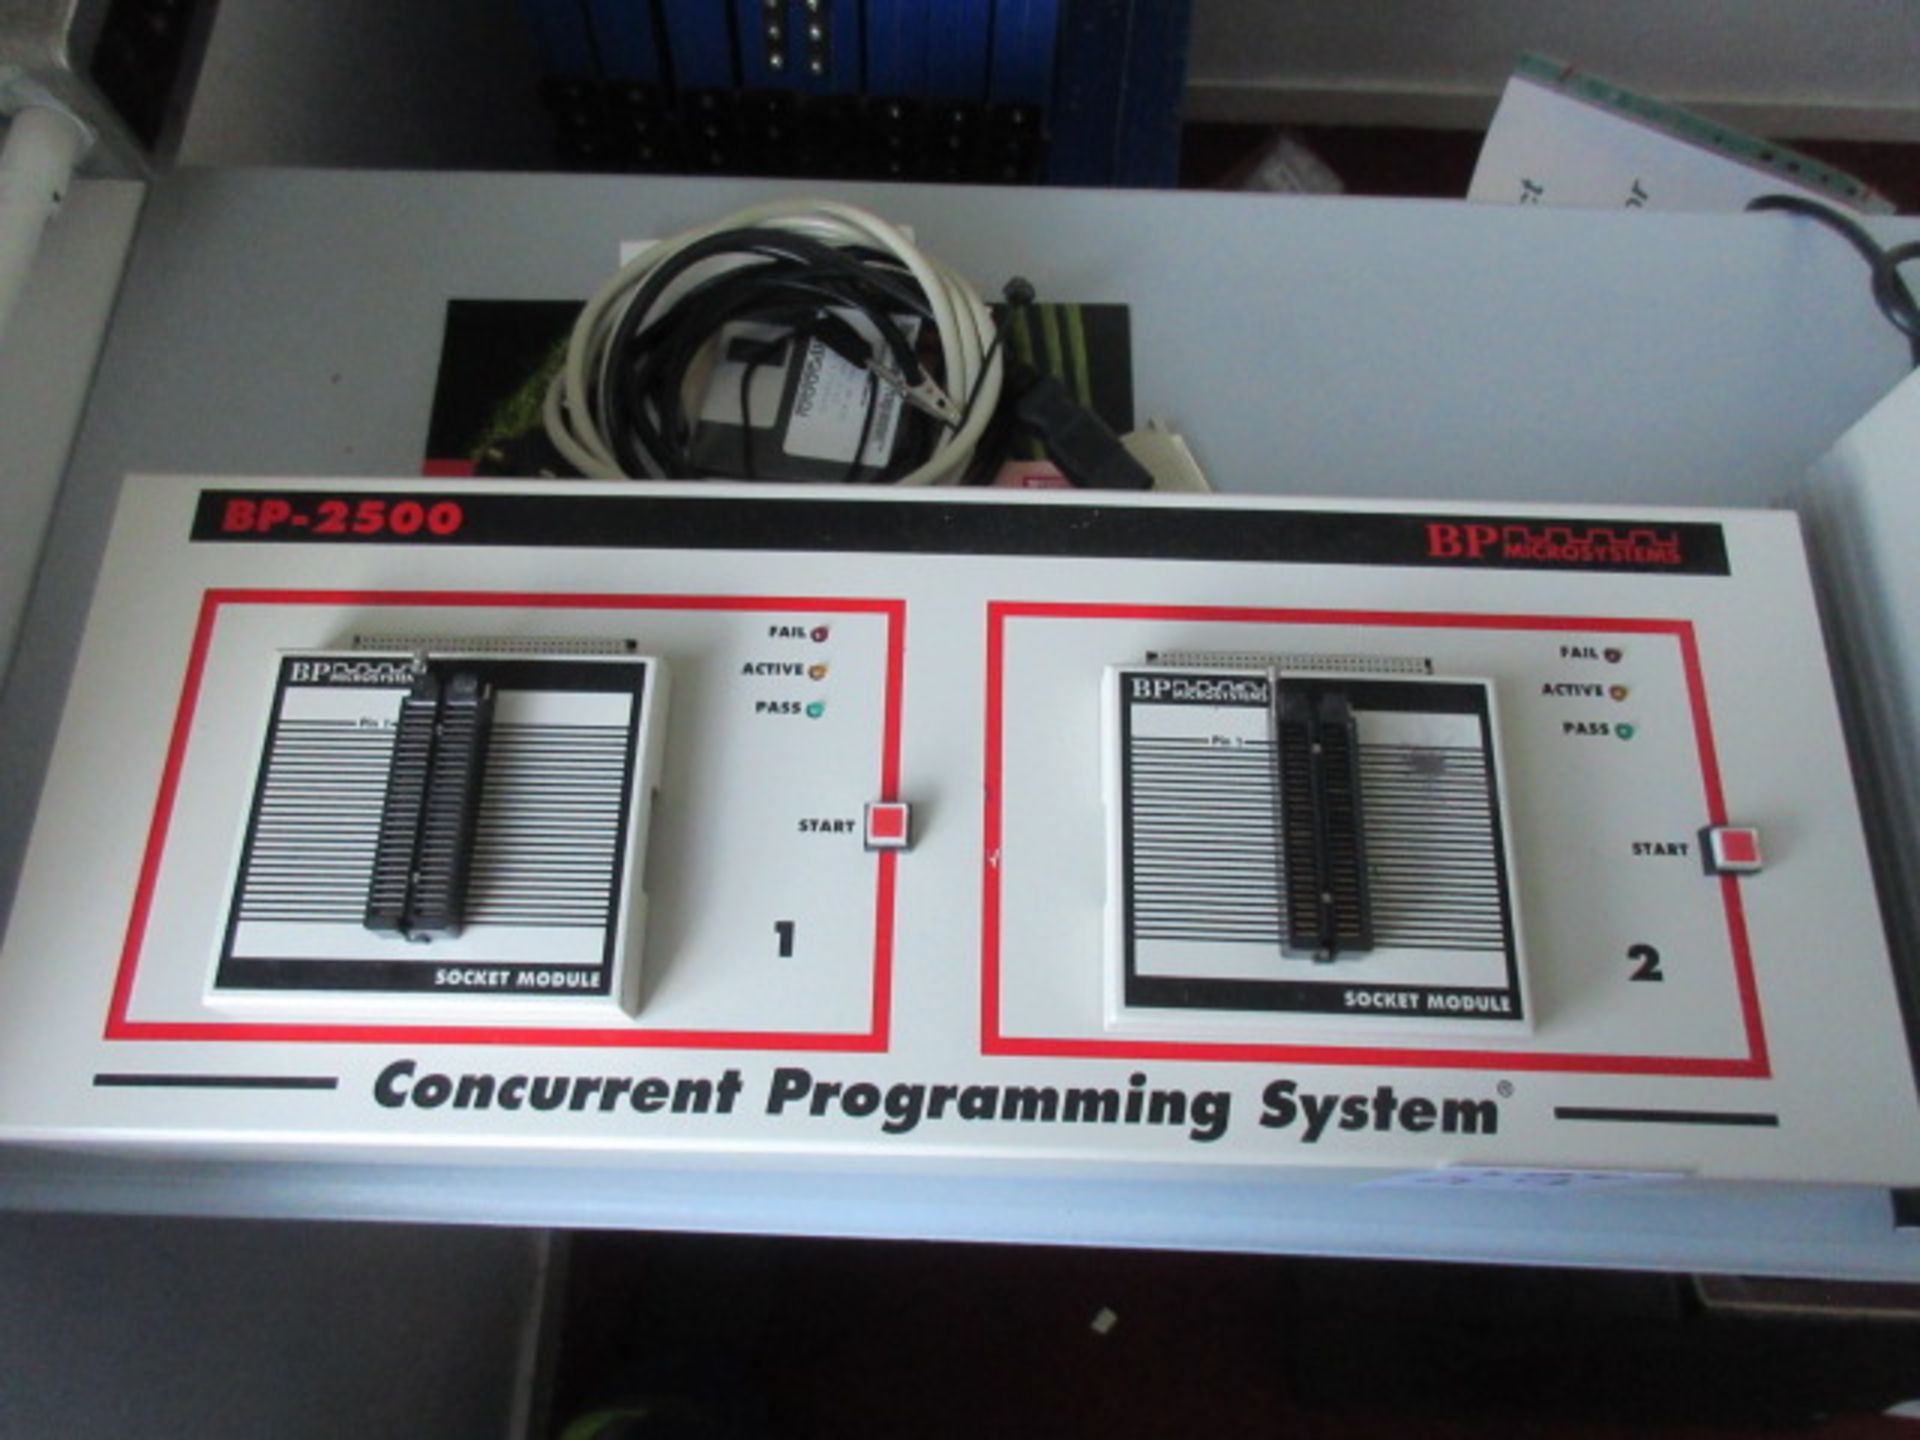 BP MICROSYSTEMS BP-2500 CONCURRENT PROGRAMMING SYSTEM